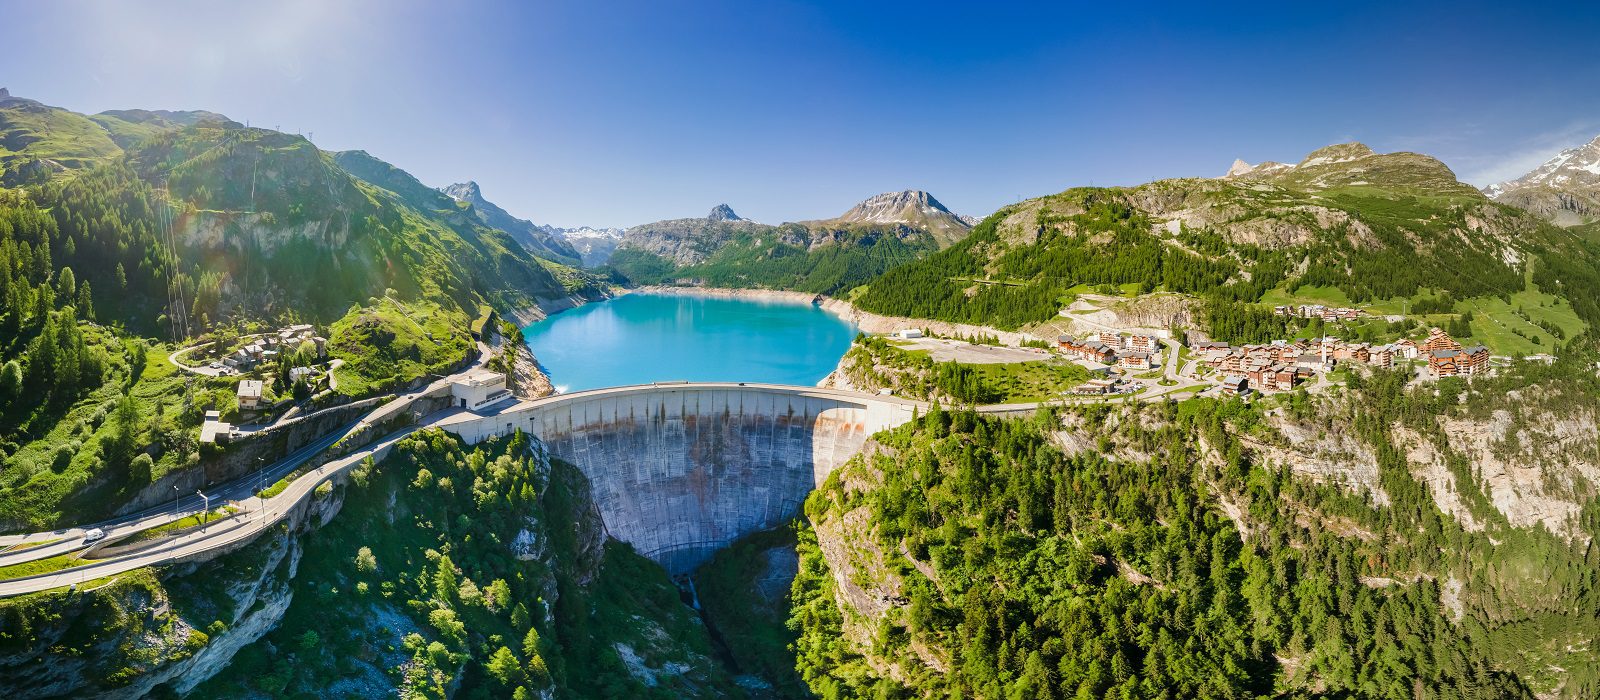 Water dam and reservoir lake aerial panoramic view in French Alps mountains generating hydroelectricity. Low CO2 footprint, decarbonize, renewable energy, sustainable development. Hydro power.